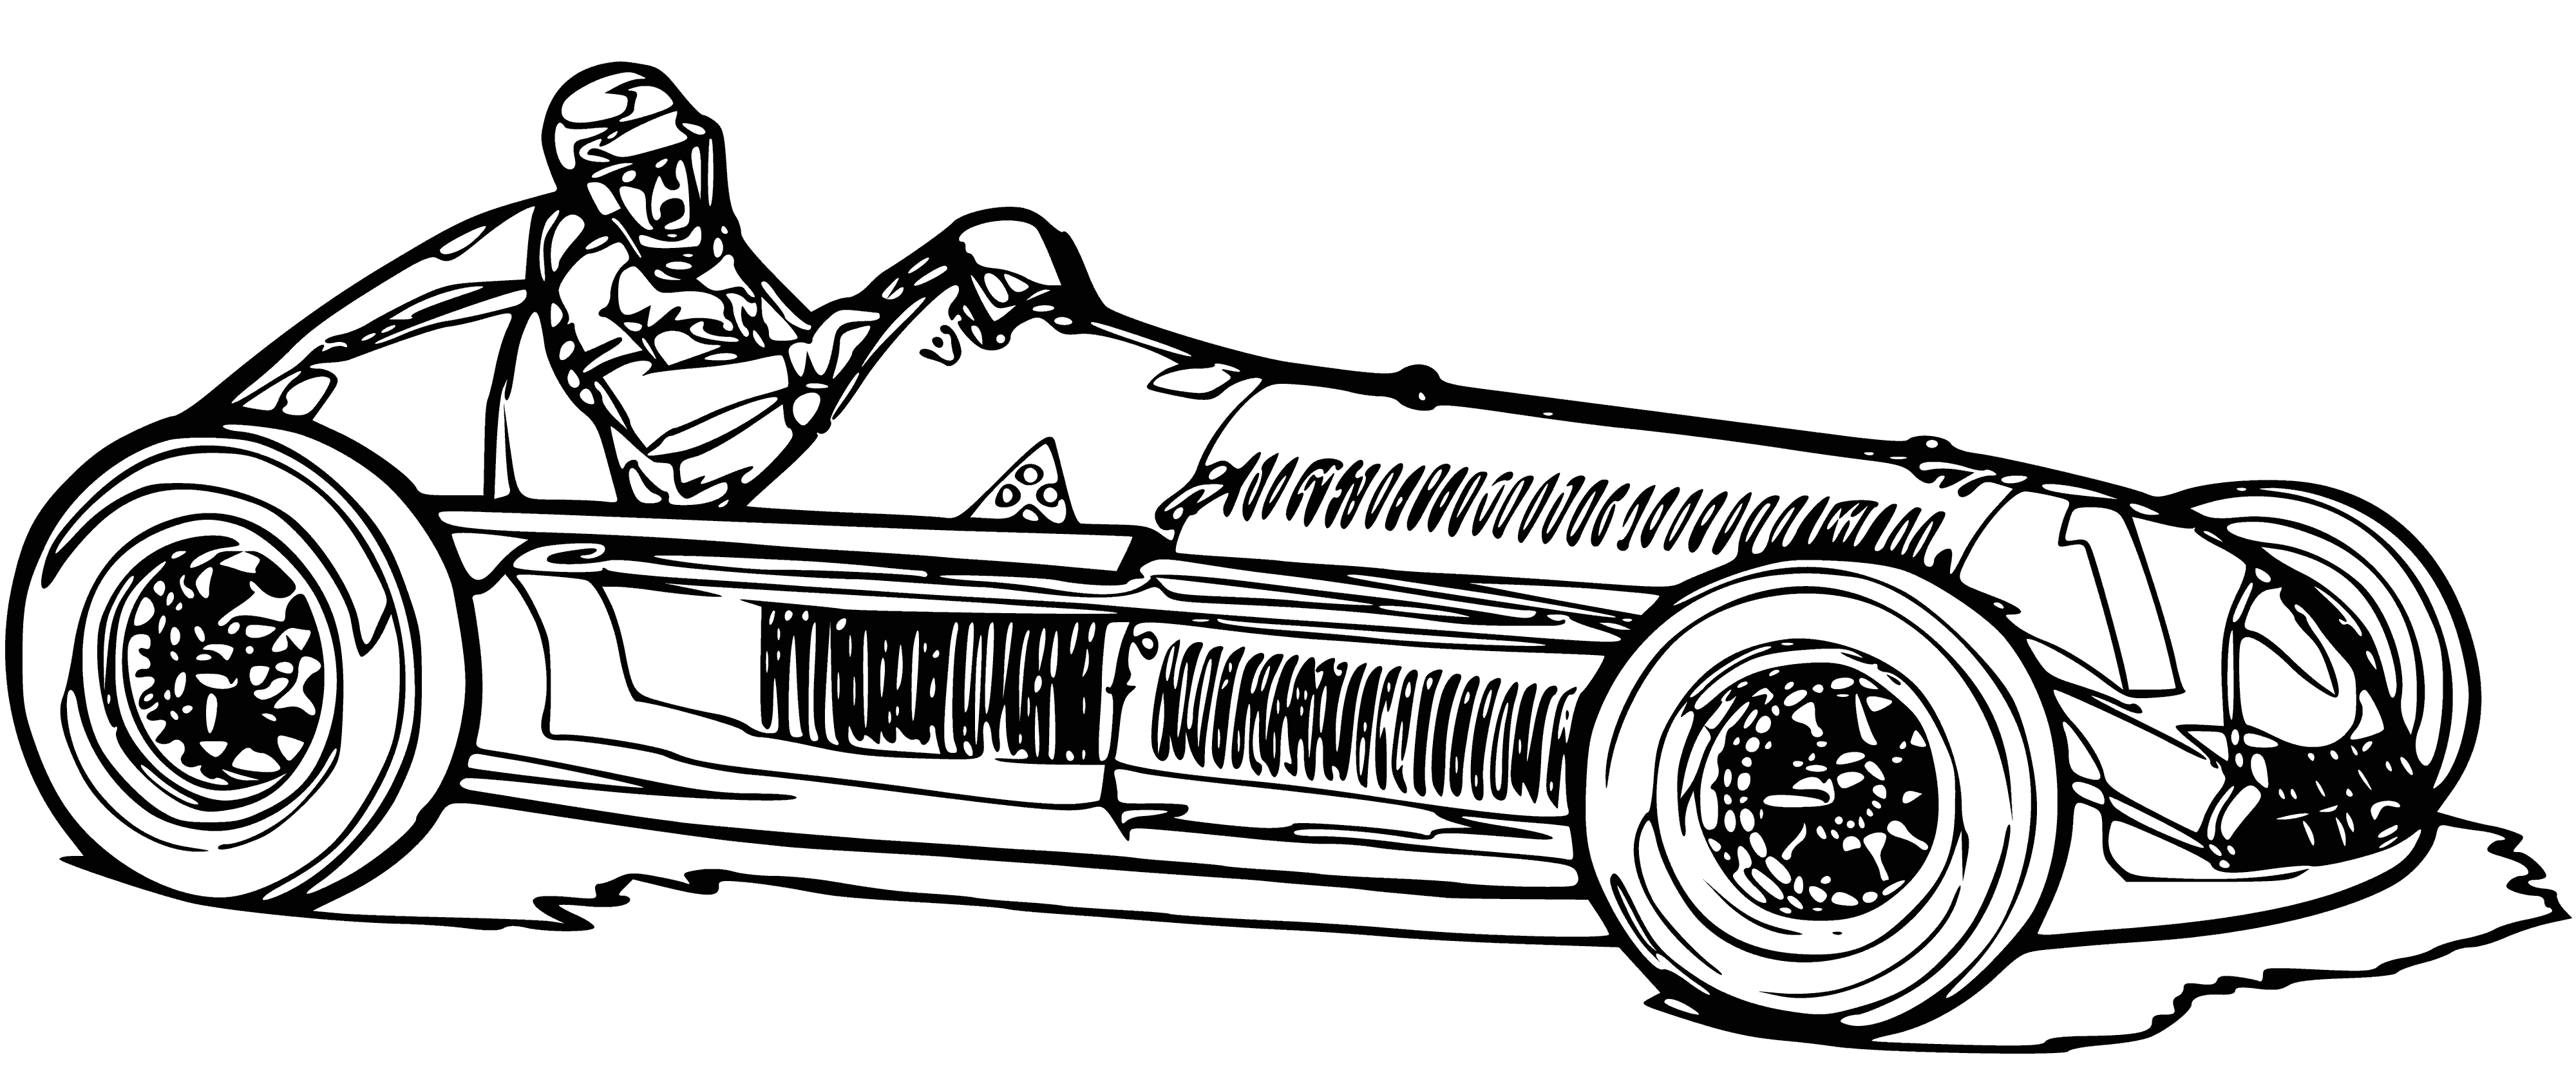 coloring page: 3 1950s Formula 1 racing cars zoom through a forest on a gravel road; drivers in each! Perfect for coloring in b&w.